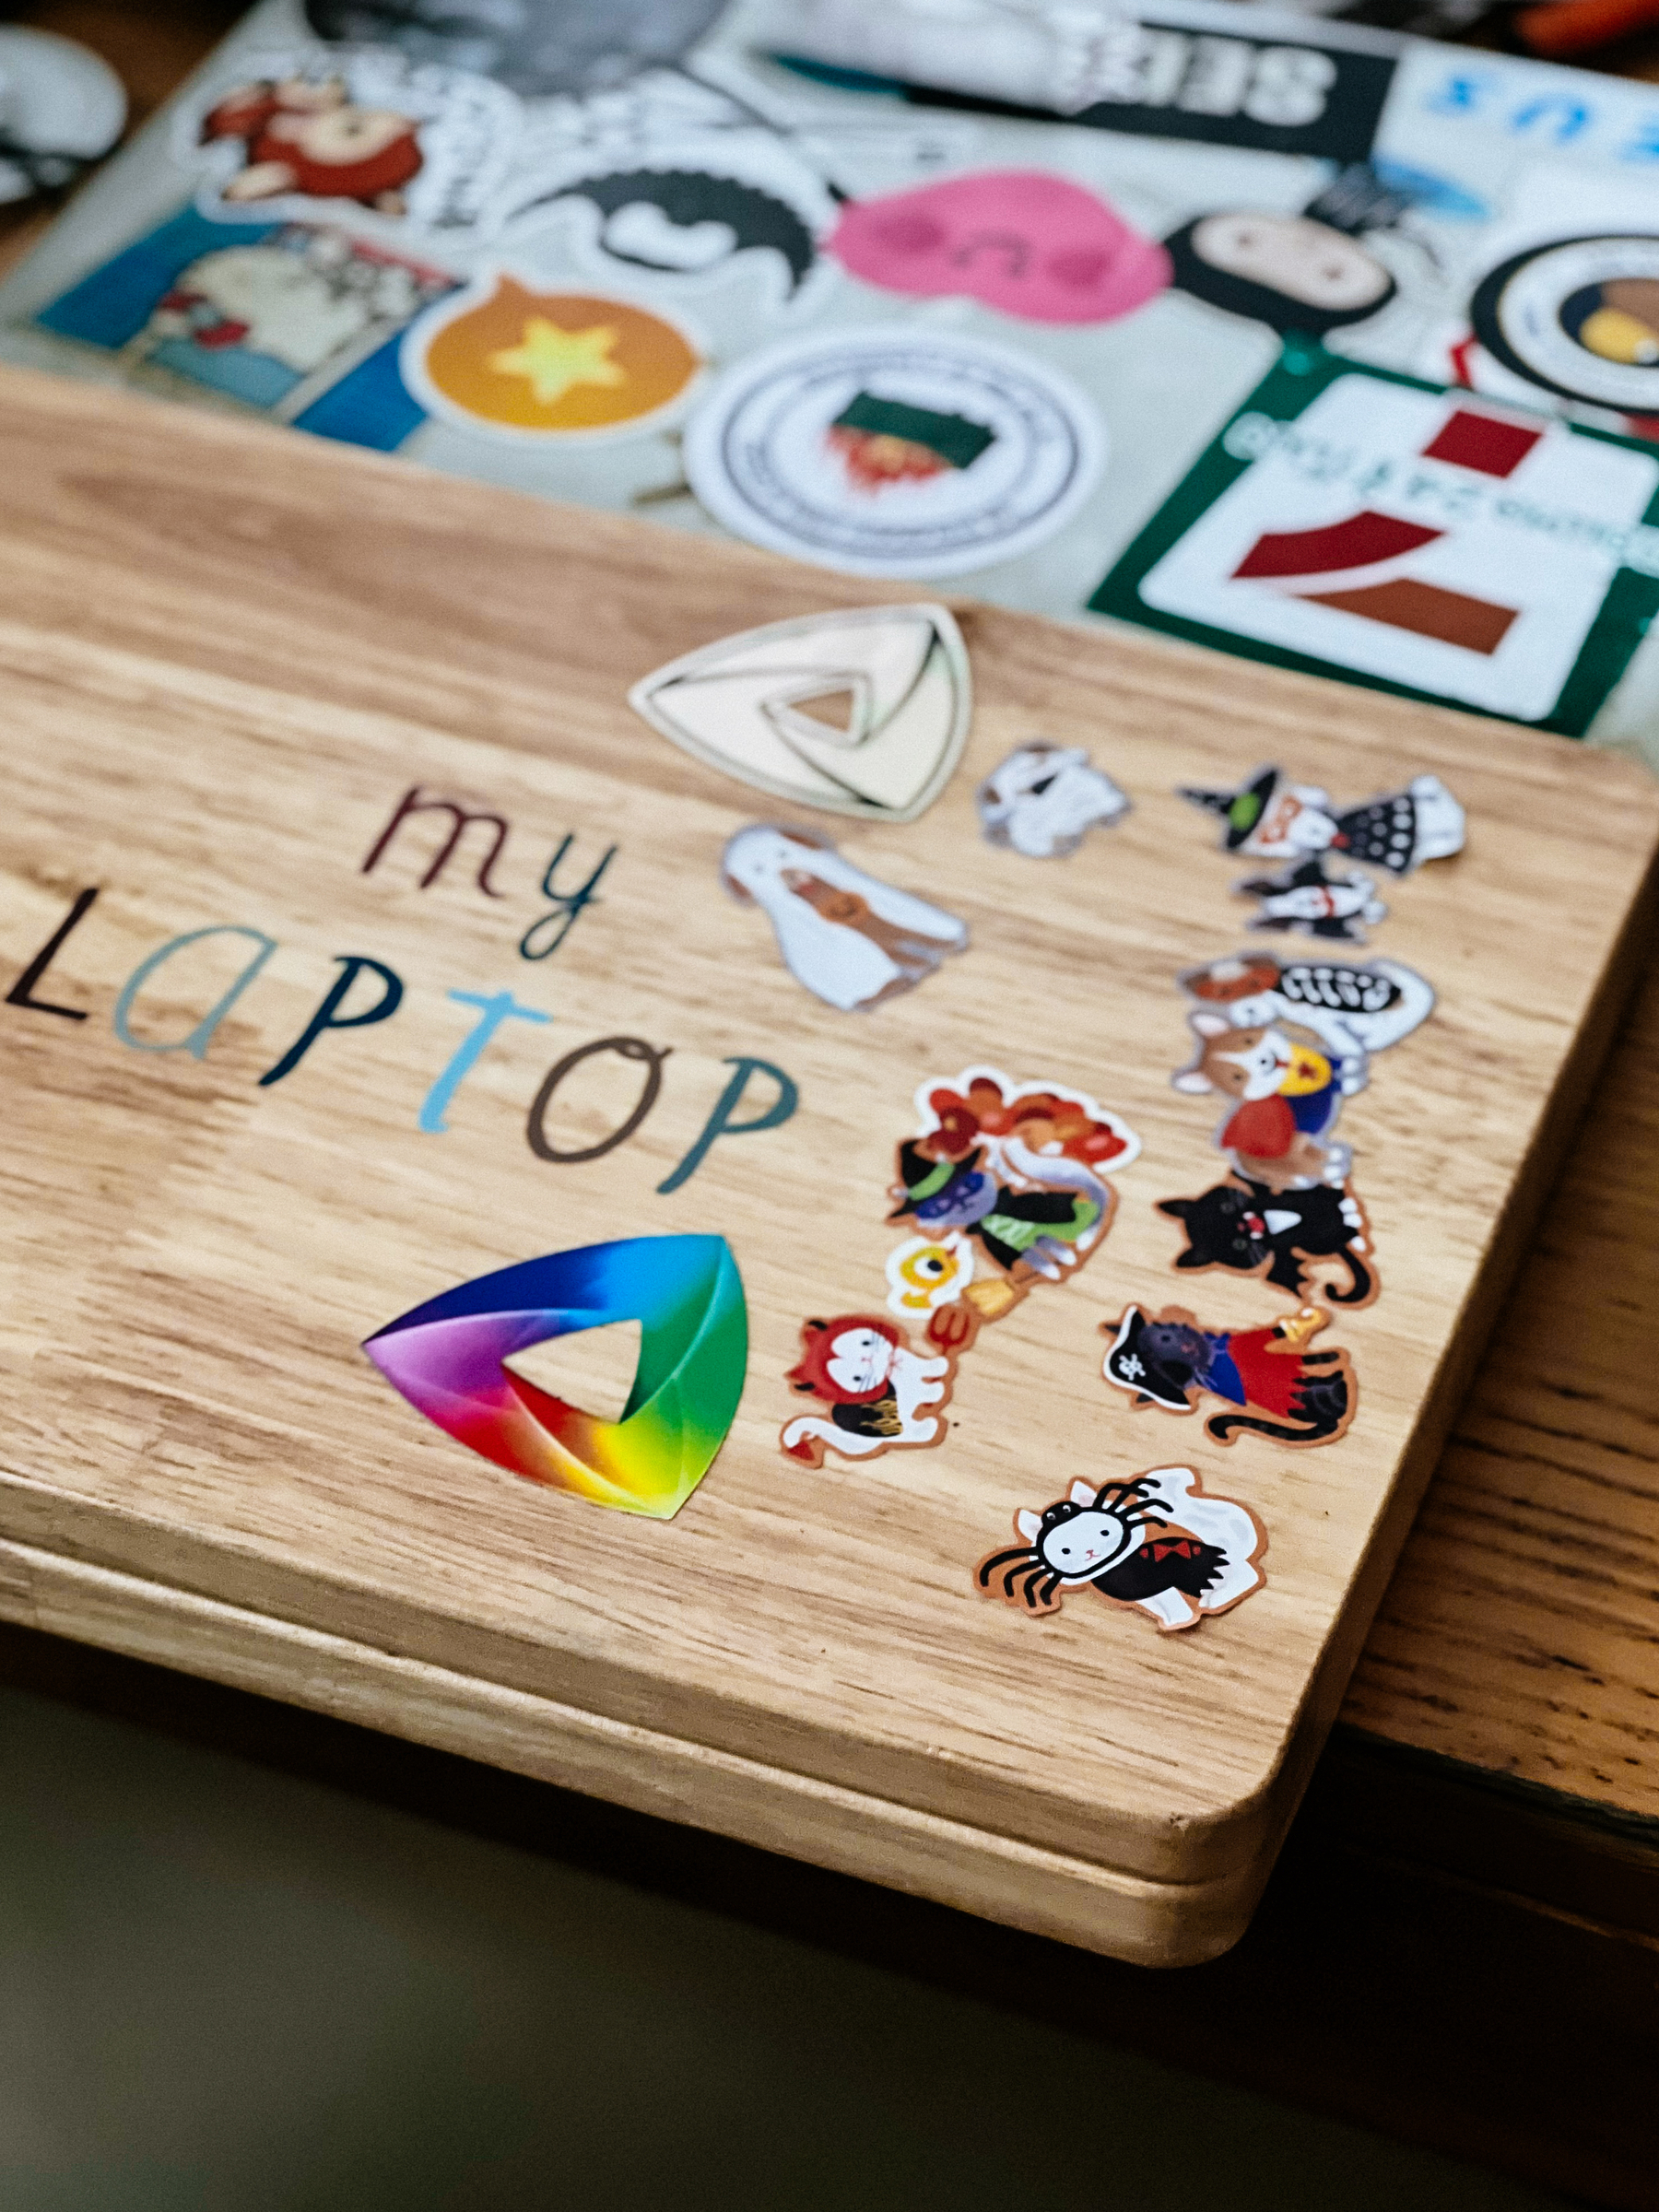 A wooden laptop, a toy, with loads of stickers, just like dad&rsquo;s (seen in the background).